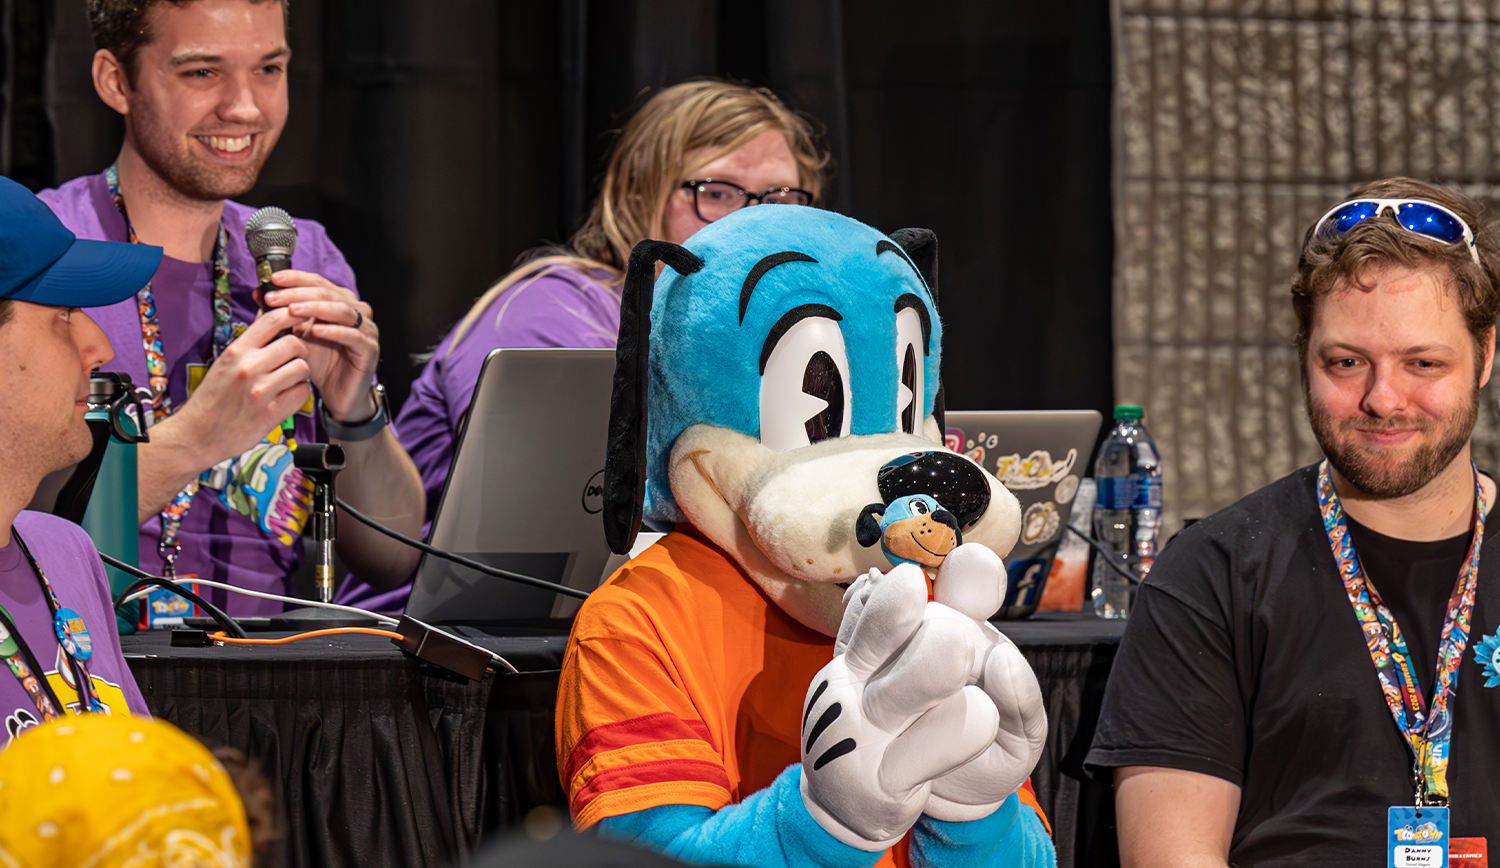 Flippy Doggenbottom holds a plushie of himself to the audience